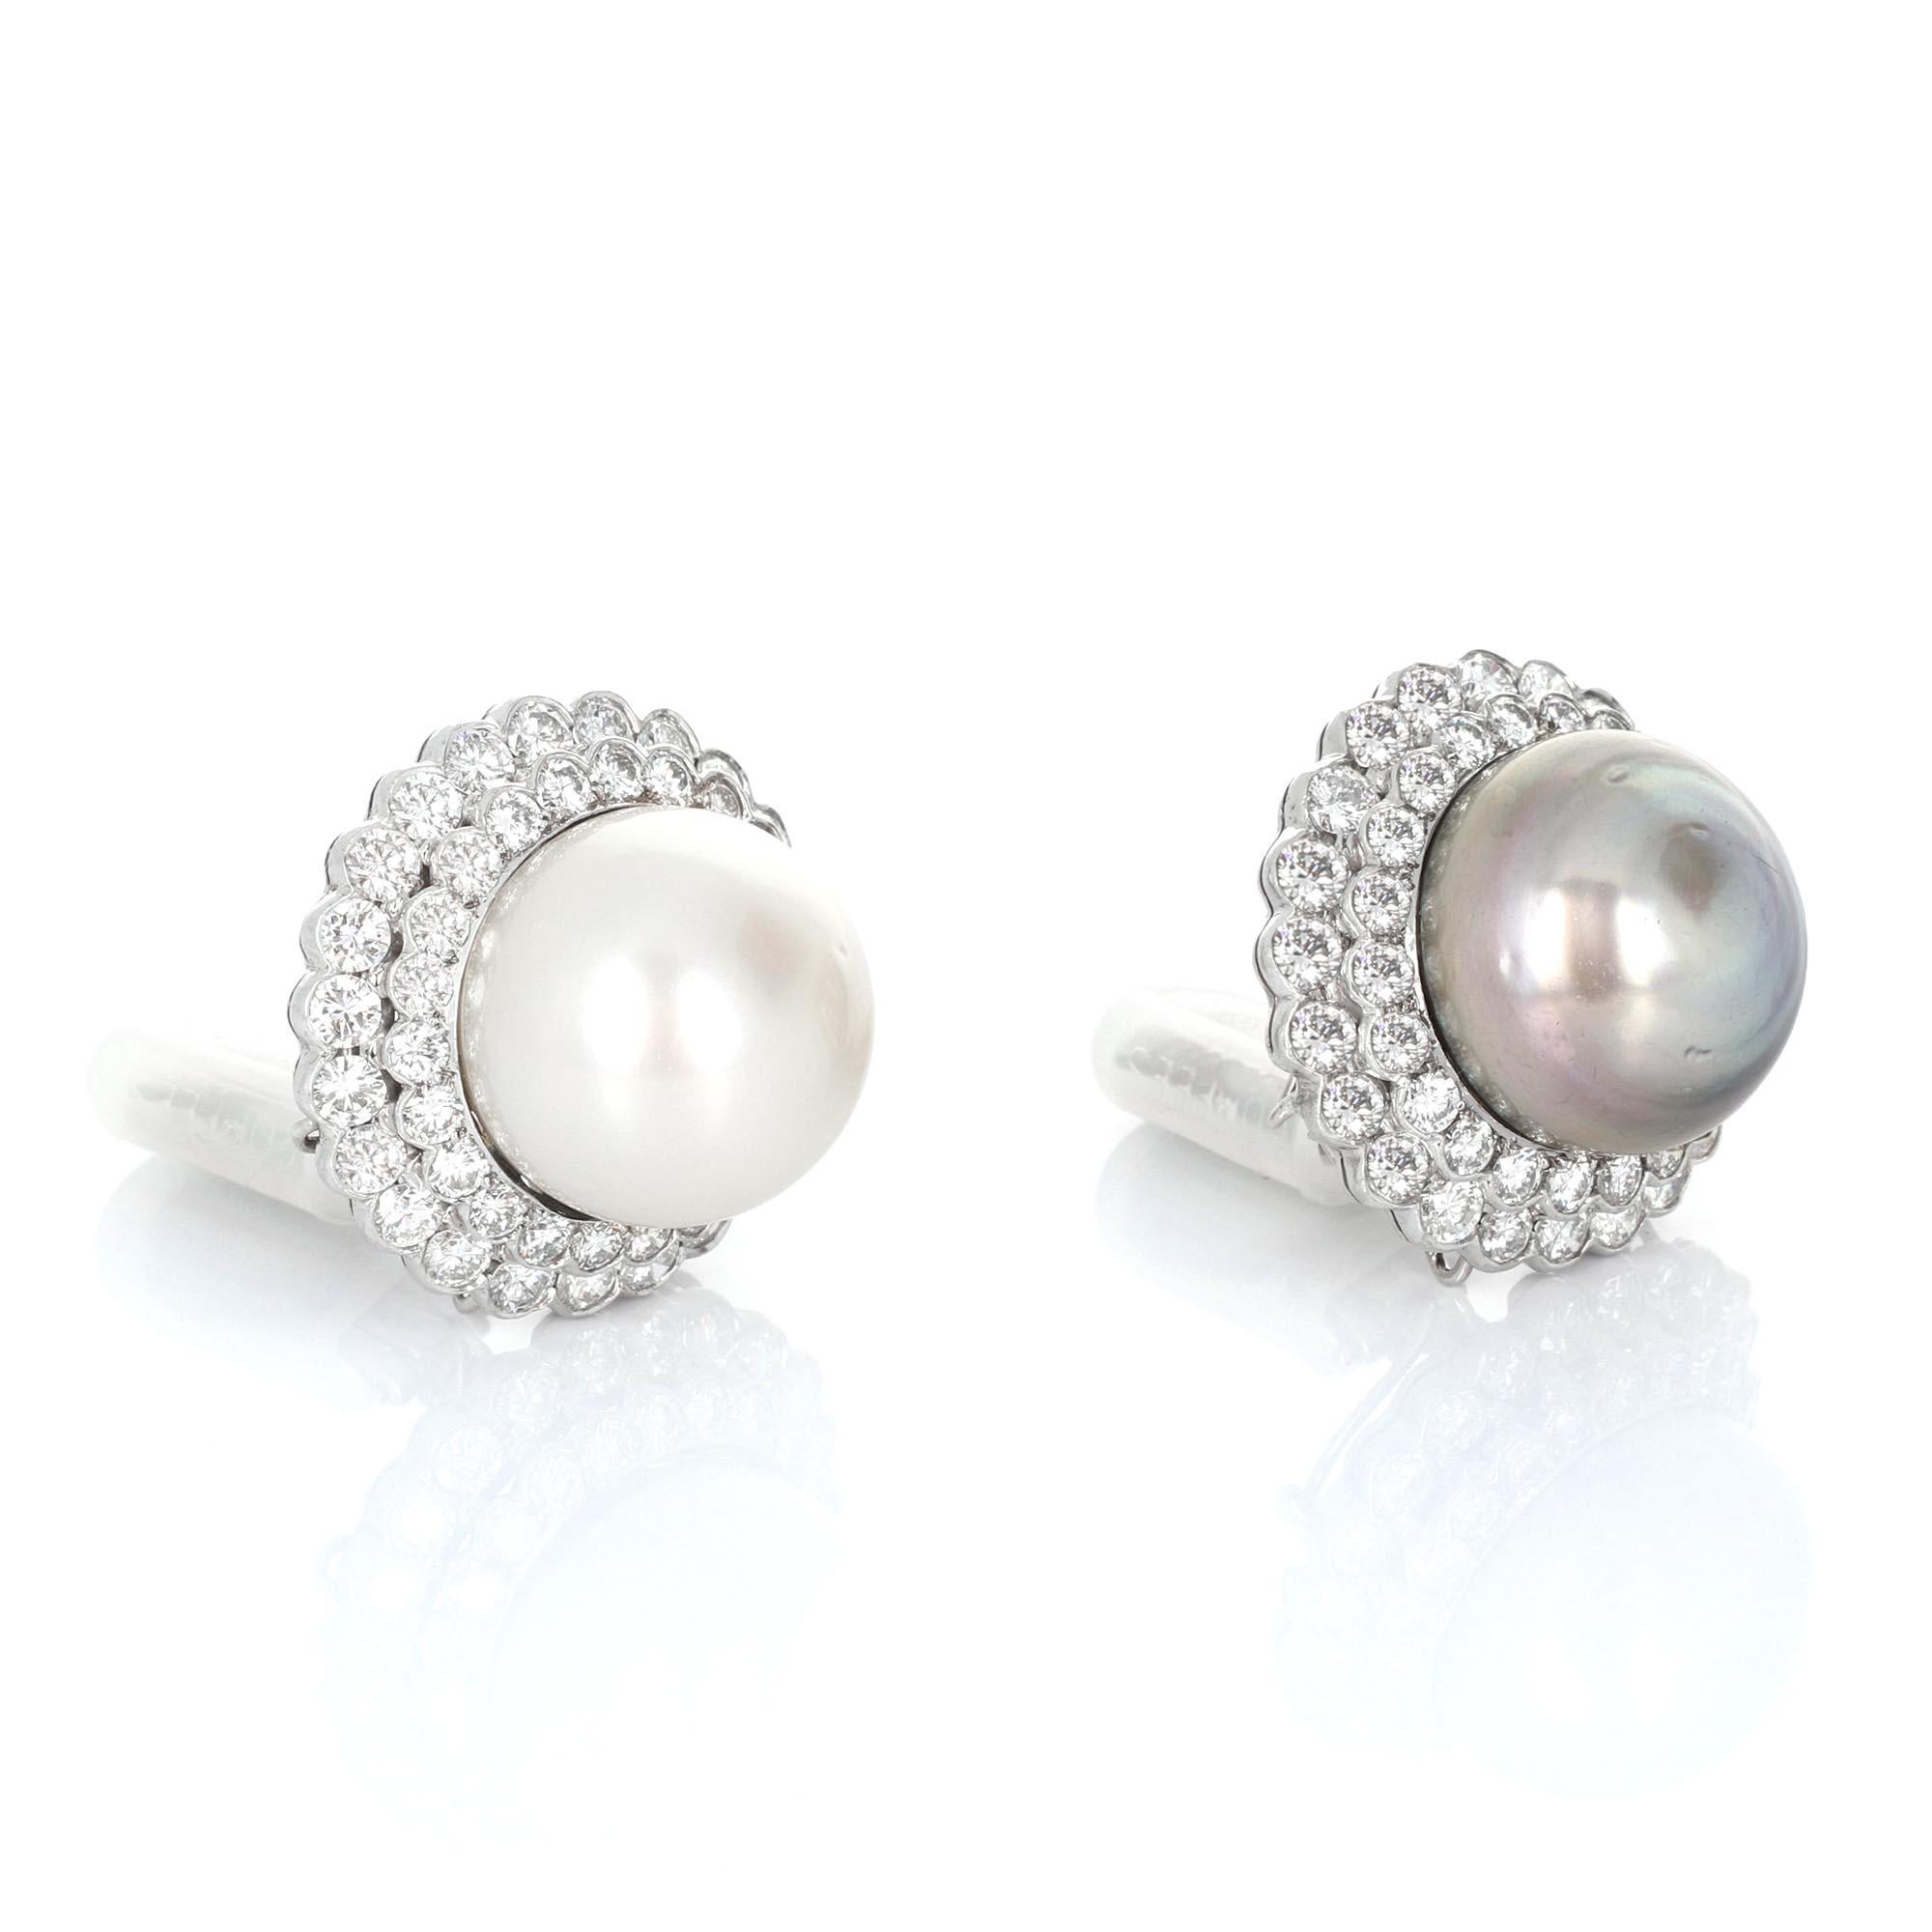 Pair of white gold south sea pearl and diamond ear clips, signed Tallarico. Made in 18 karat white gold, with round brilliant cut diamonds (F-G color, VS clarity), a white south sea pearl (measuring 17.6mm), and a black south sea pearl (measuring